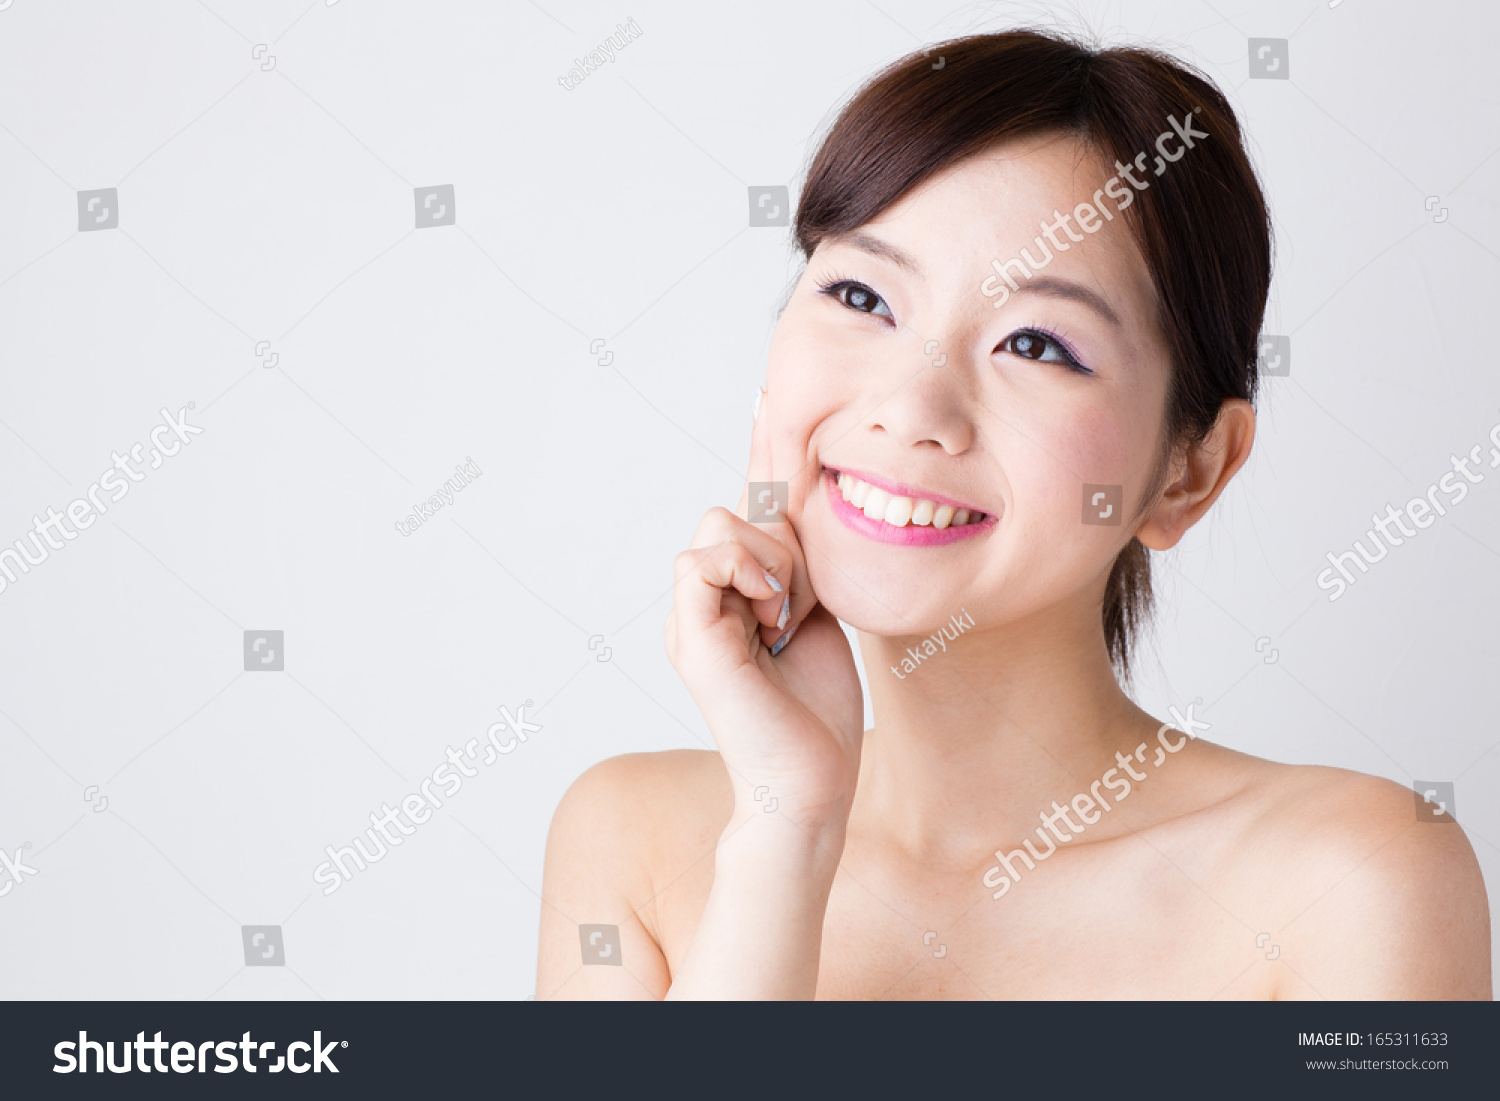 attractive asian woman skin care image isolated on white background #165311633